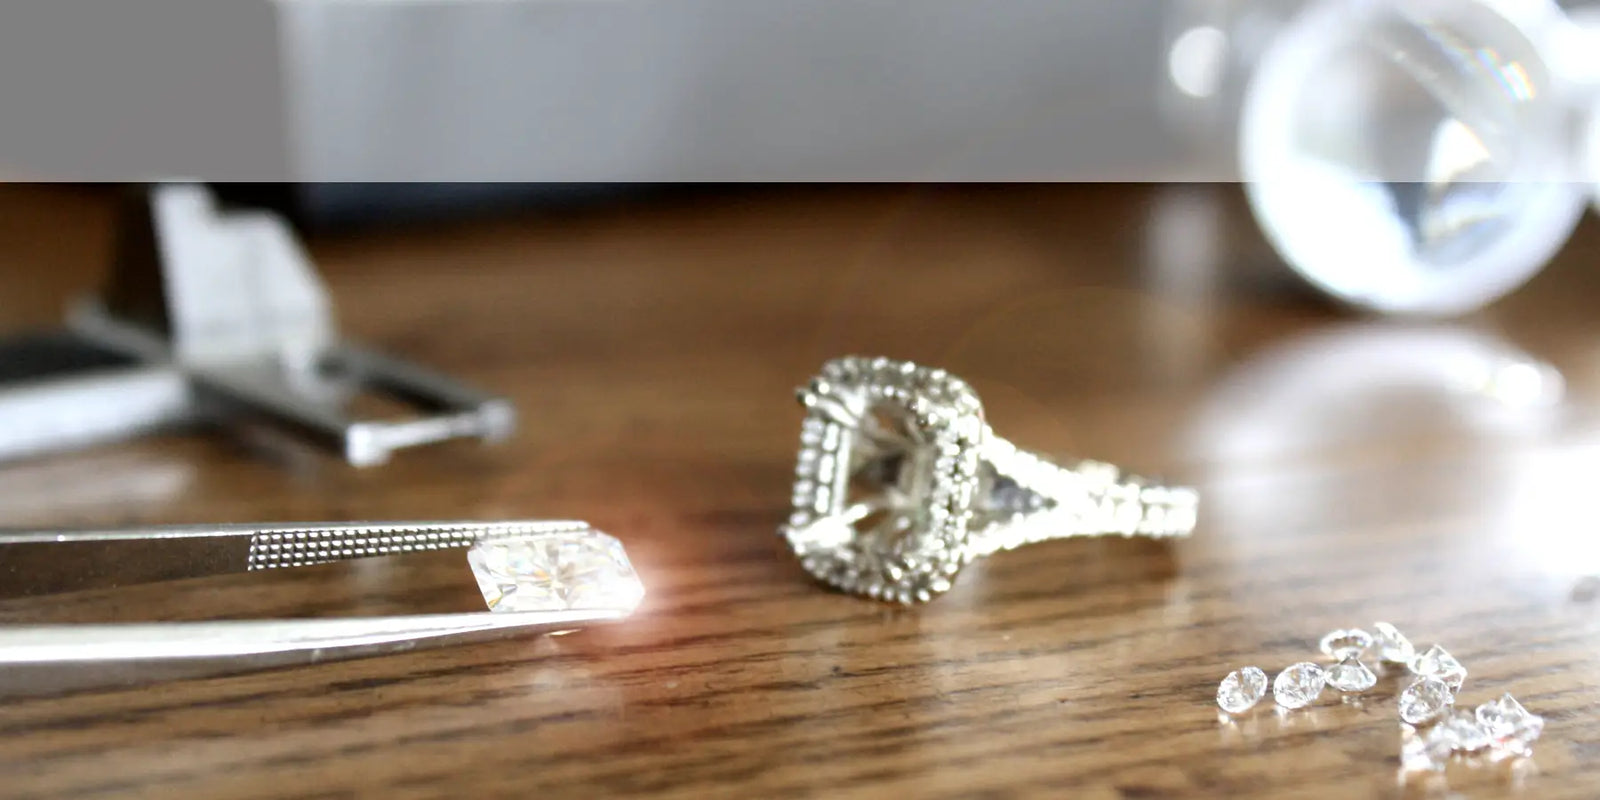 quorri offers affordable jewelry services and repairs in Canada